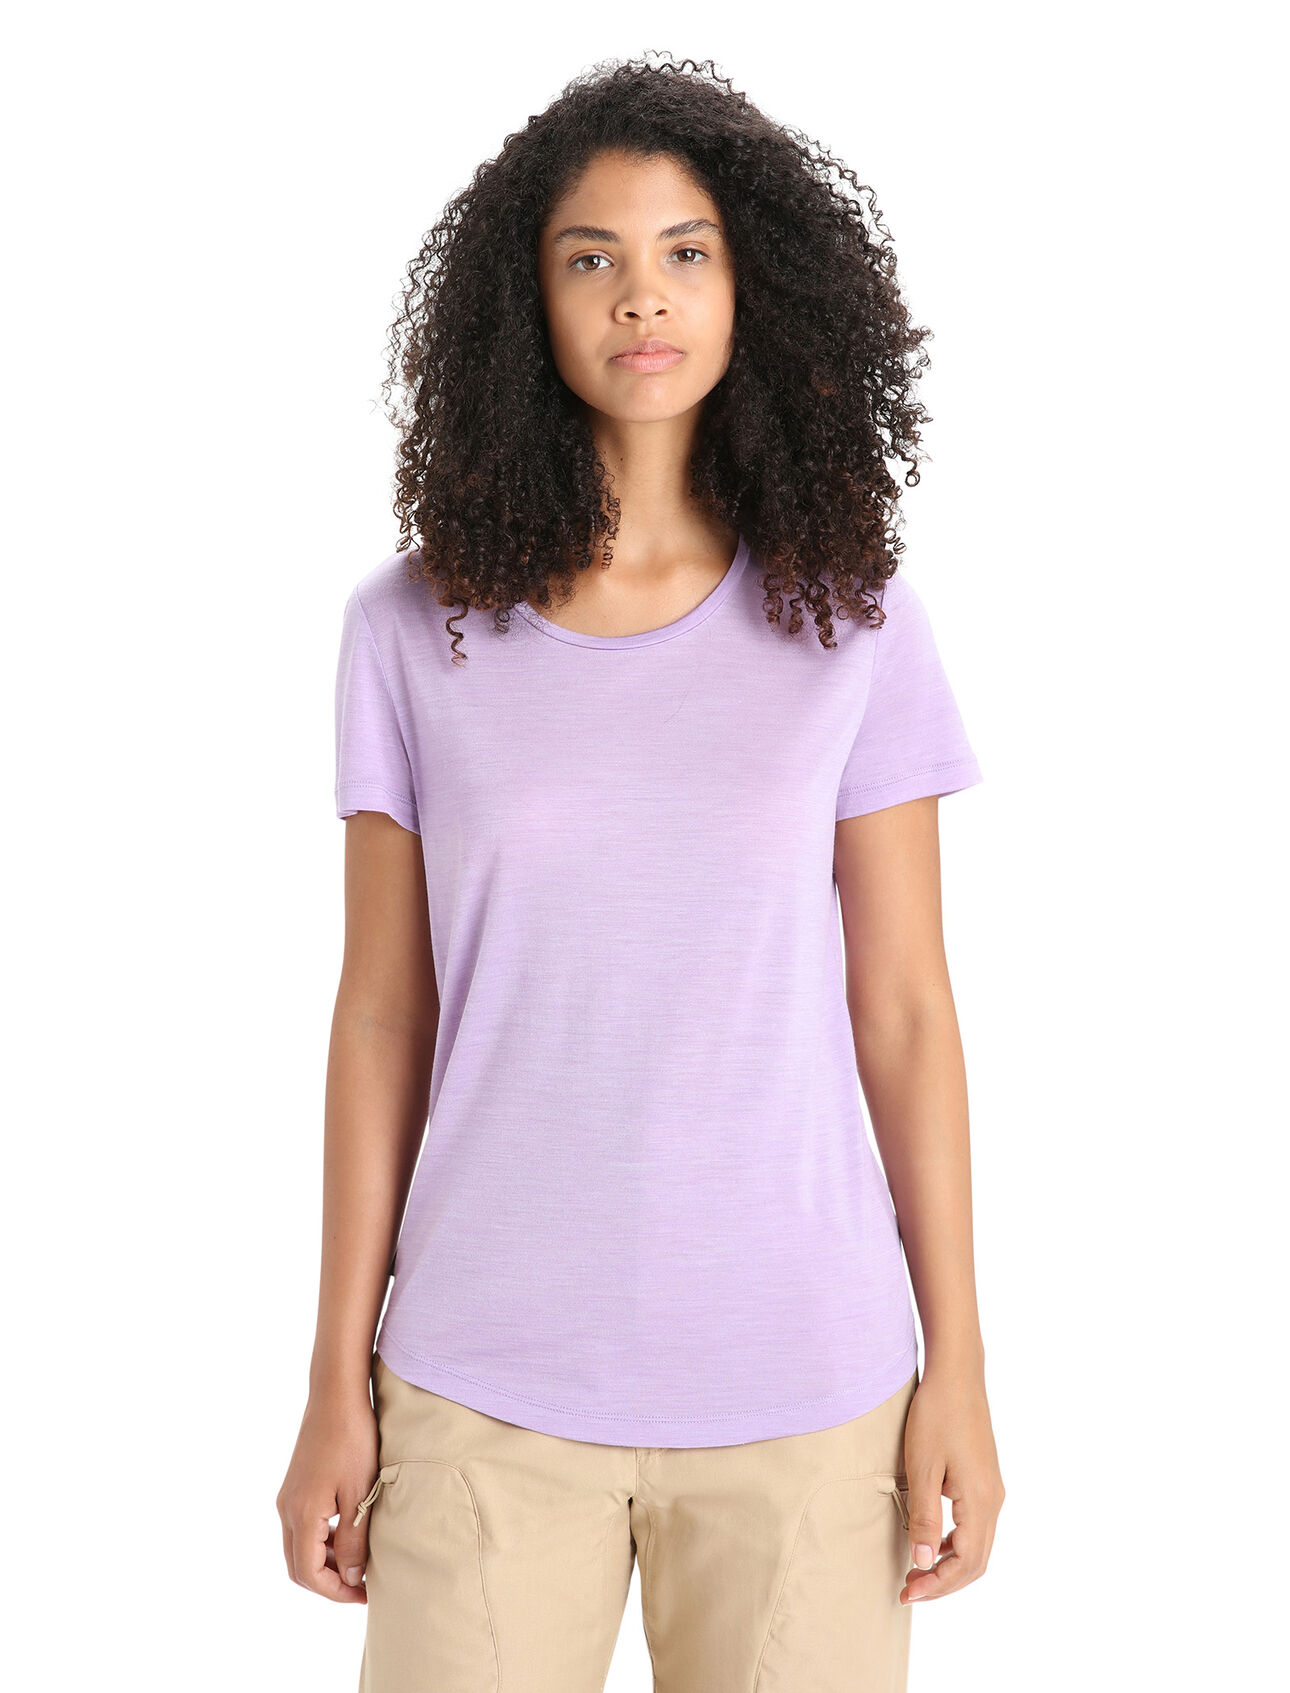 Womens Merino Sphere II Short Sleeve T-Shirt A soft merino-blend tee made with our lightweight Cool-Lite™ jersey fabric, the Sphere II Short Sleeve Tee provides natural breathability, odor resistance and comfort.